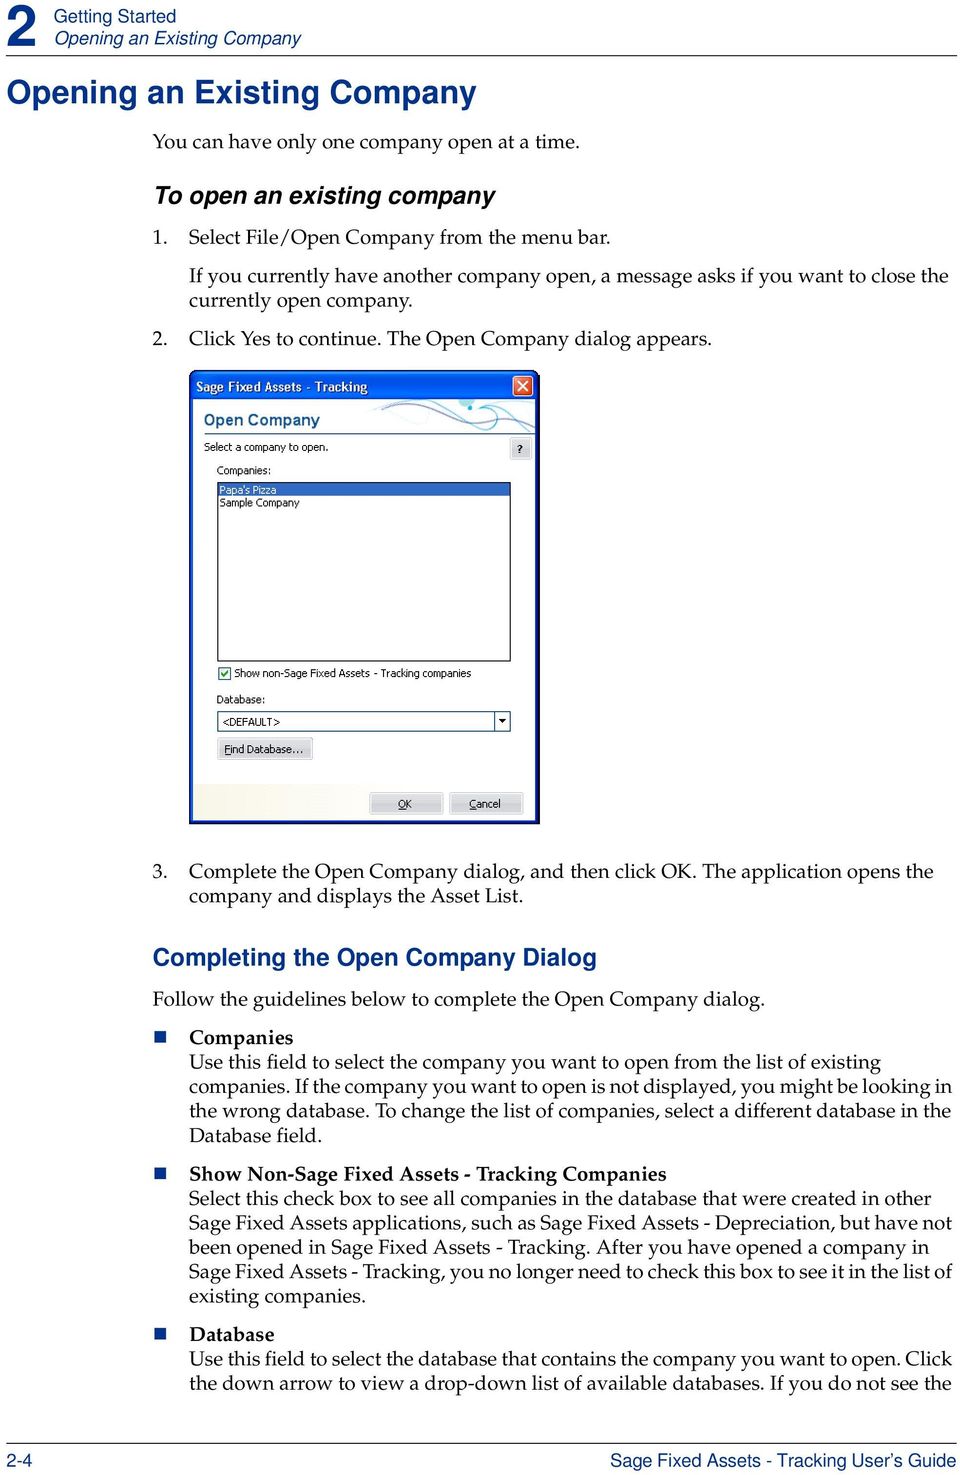 Complete the Open Company dialog, and then click OK. The application opens the company and displays the Asset List.